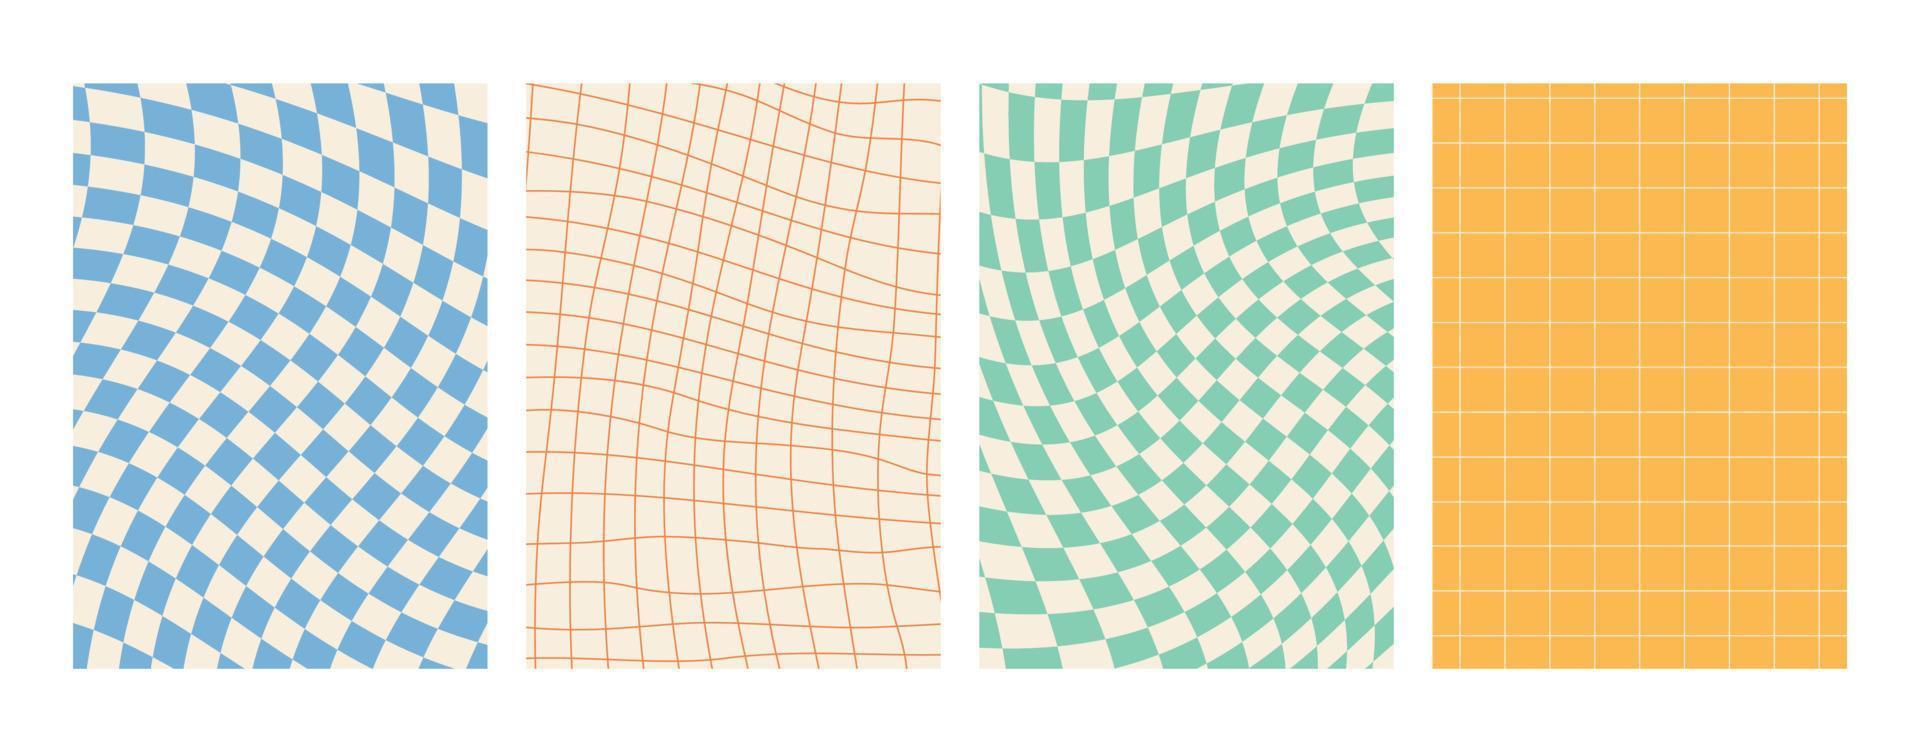 Groovy hippie Y2KIs backgrounds. Chessboard, mesh, waves, swirl, twirl pattern. Twisted and distorted vector texture in a trendy retro psychedelic style. The aesthetics of the hippies of the 70s.